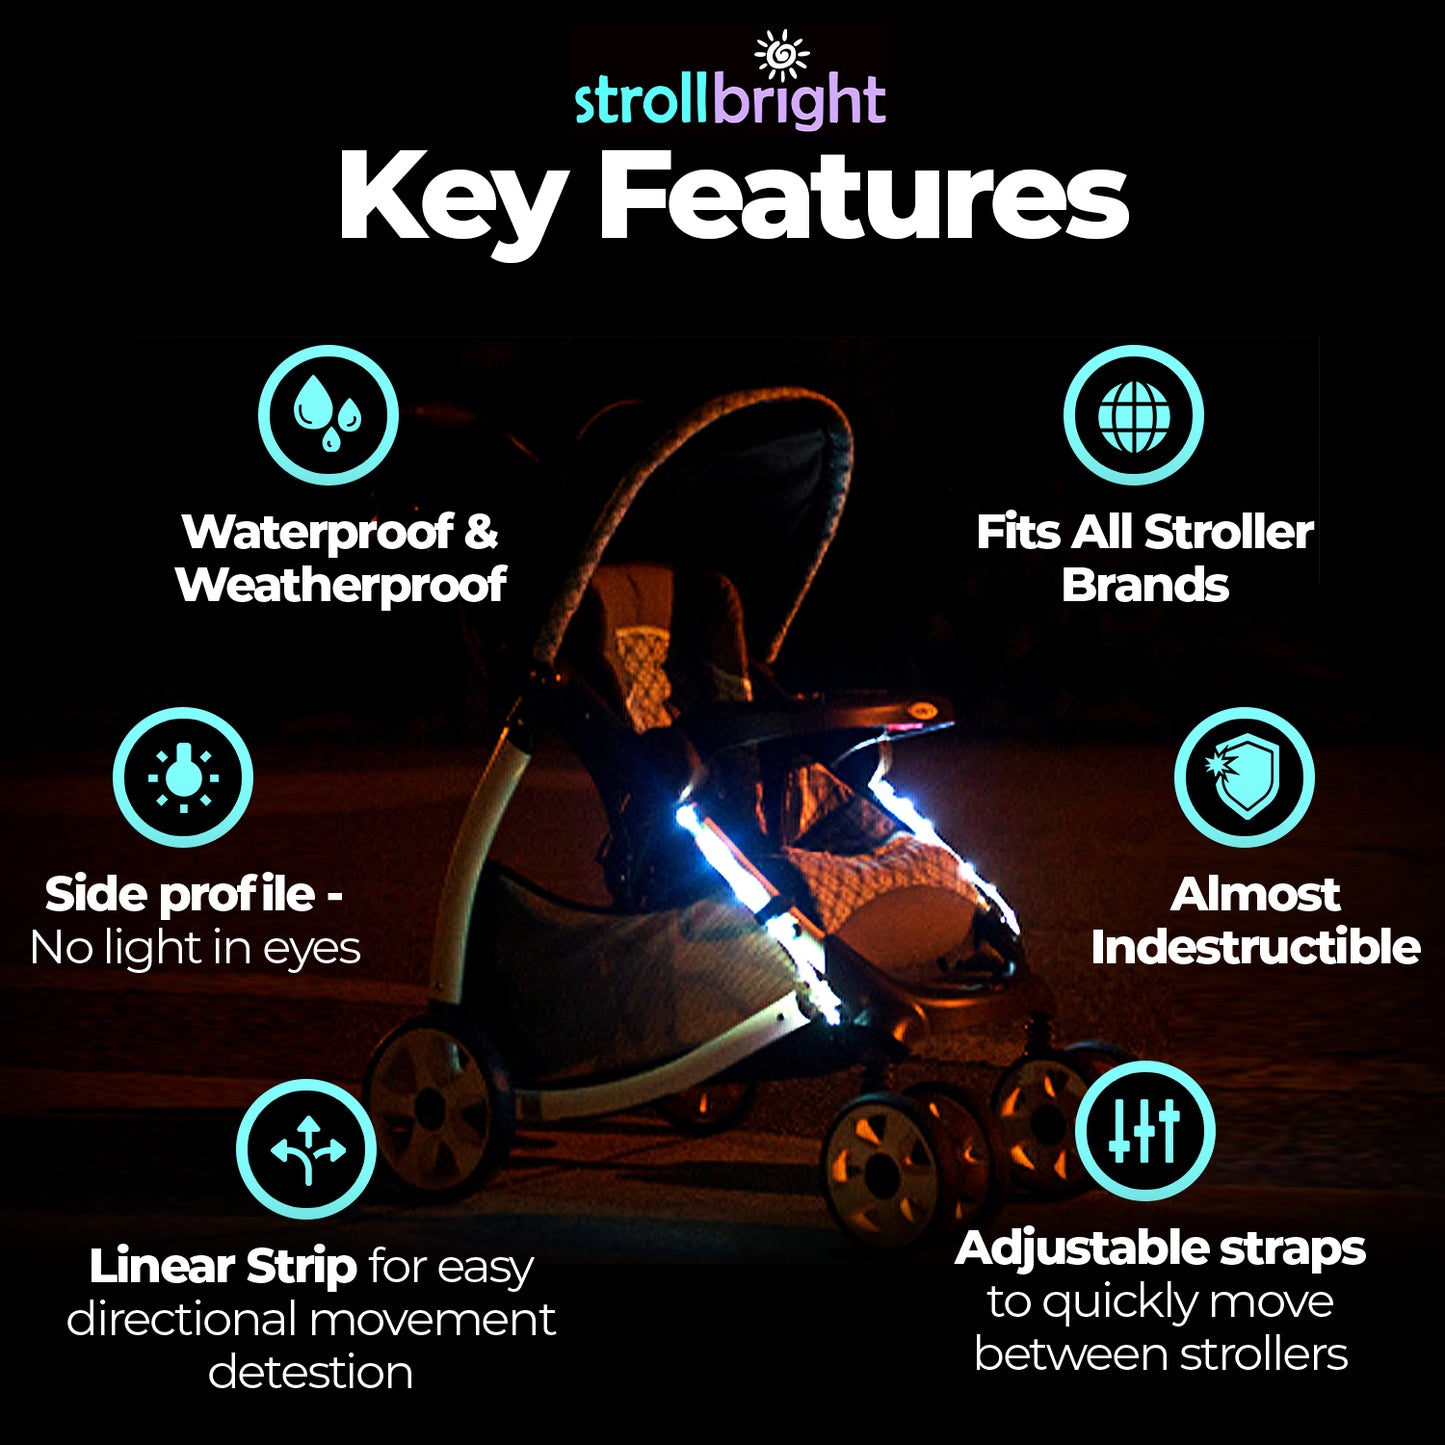 Strollbright LED Lights for Strollers - Walking Light for Strollers - Long Lasting LED Safety Light for Baby Strollers